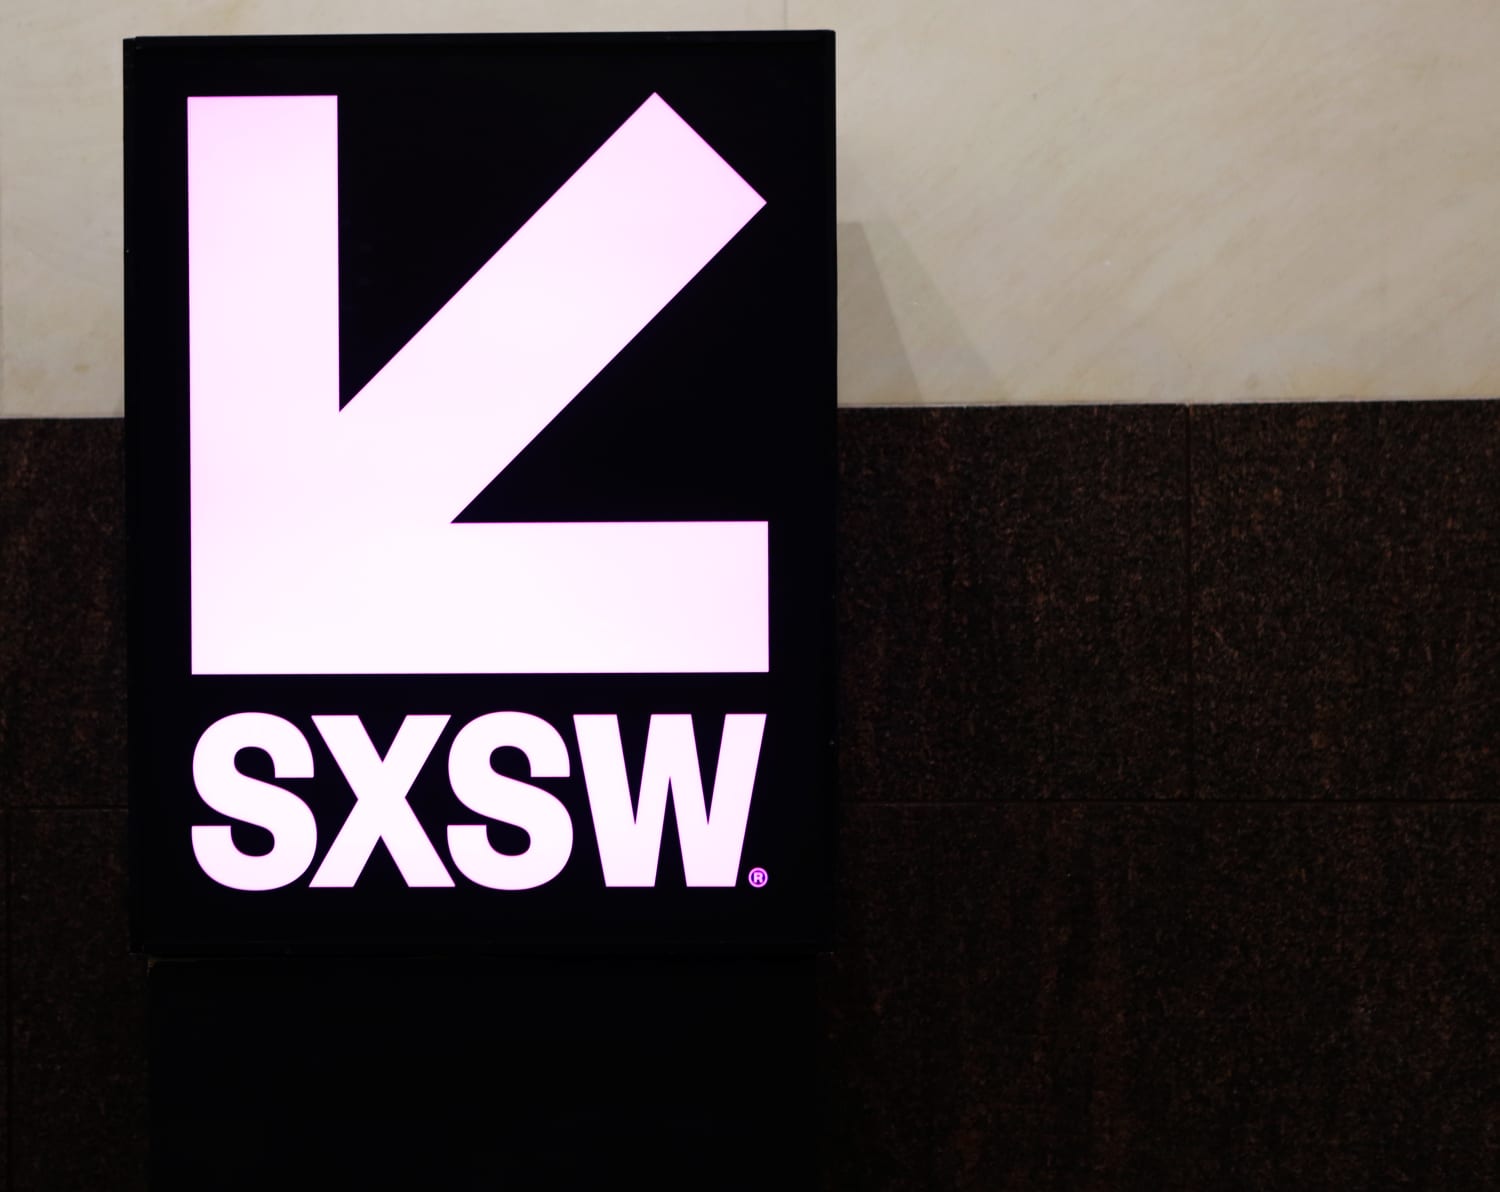 You Can Watch the SXSW 2020 Film Lineup for Free for 10 Days